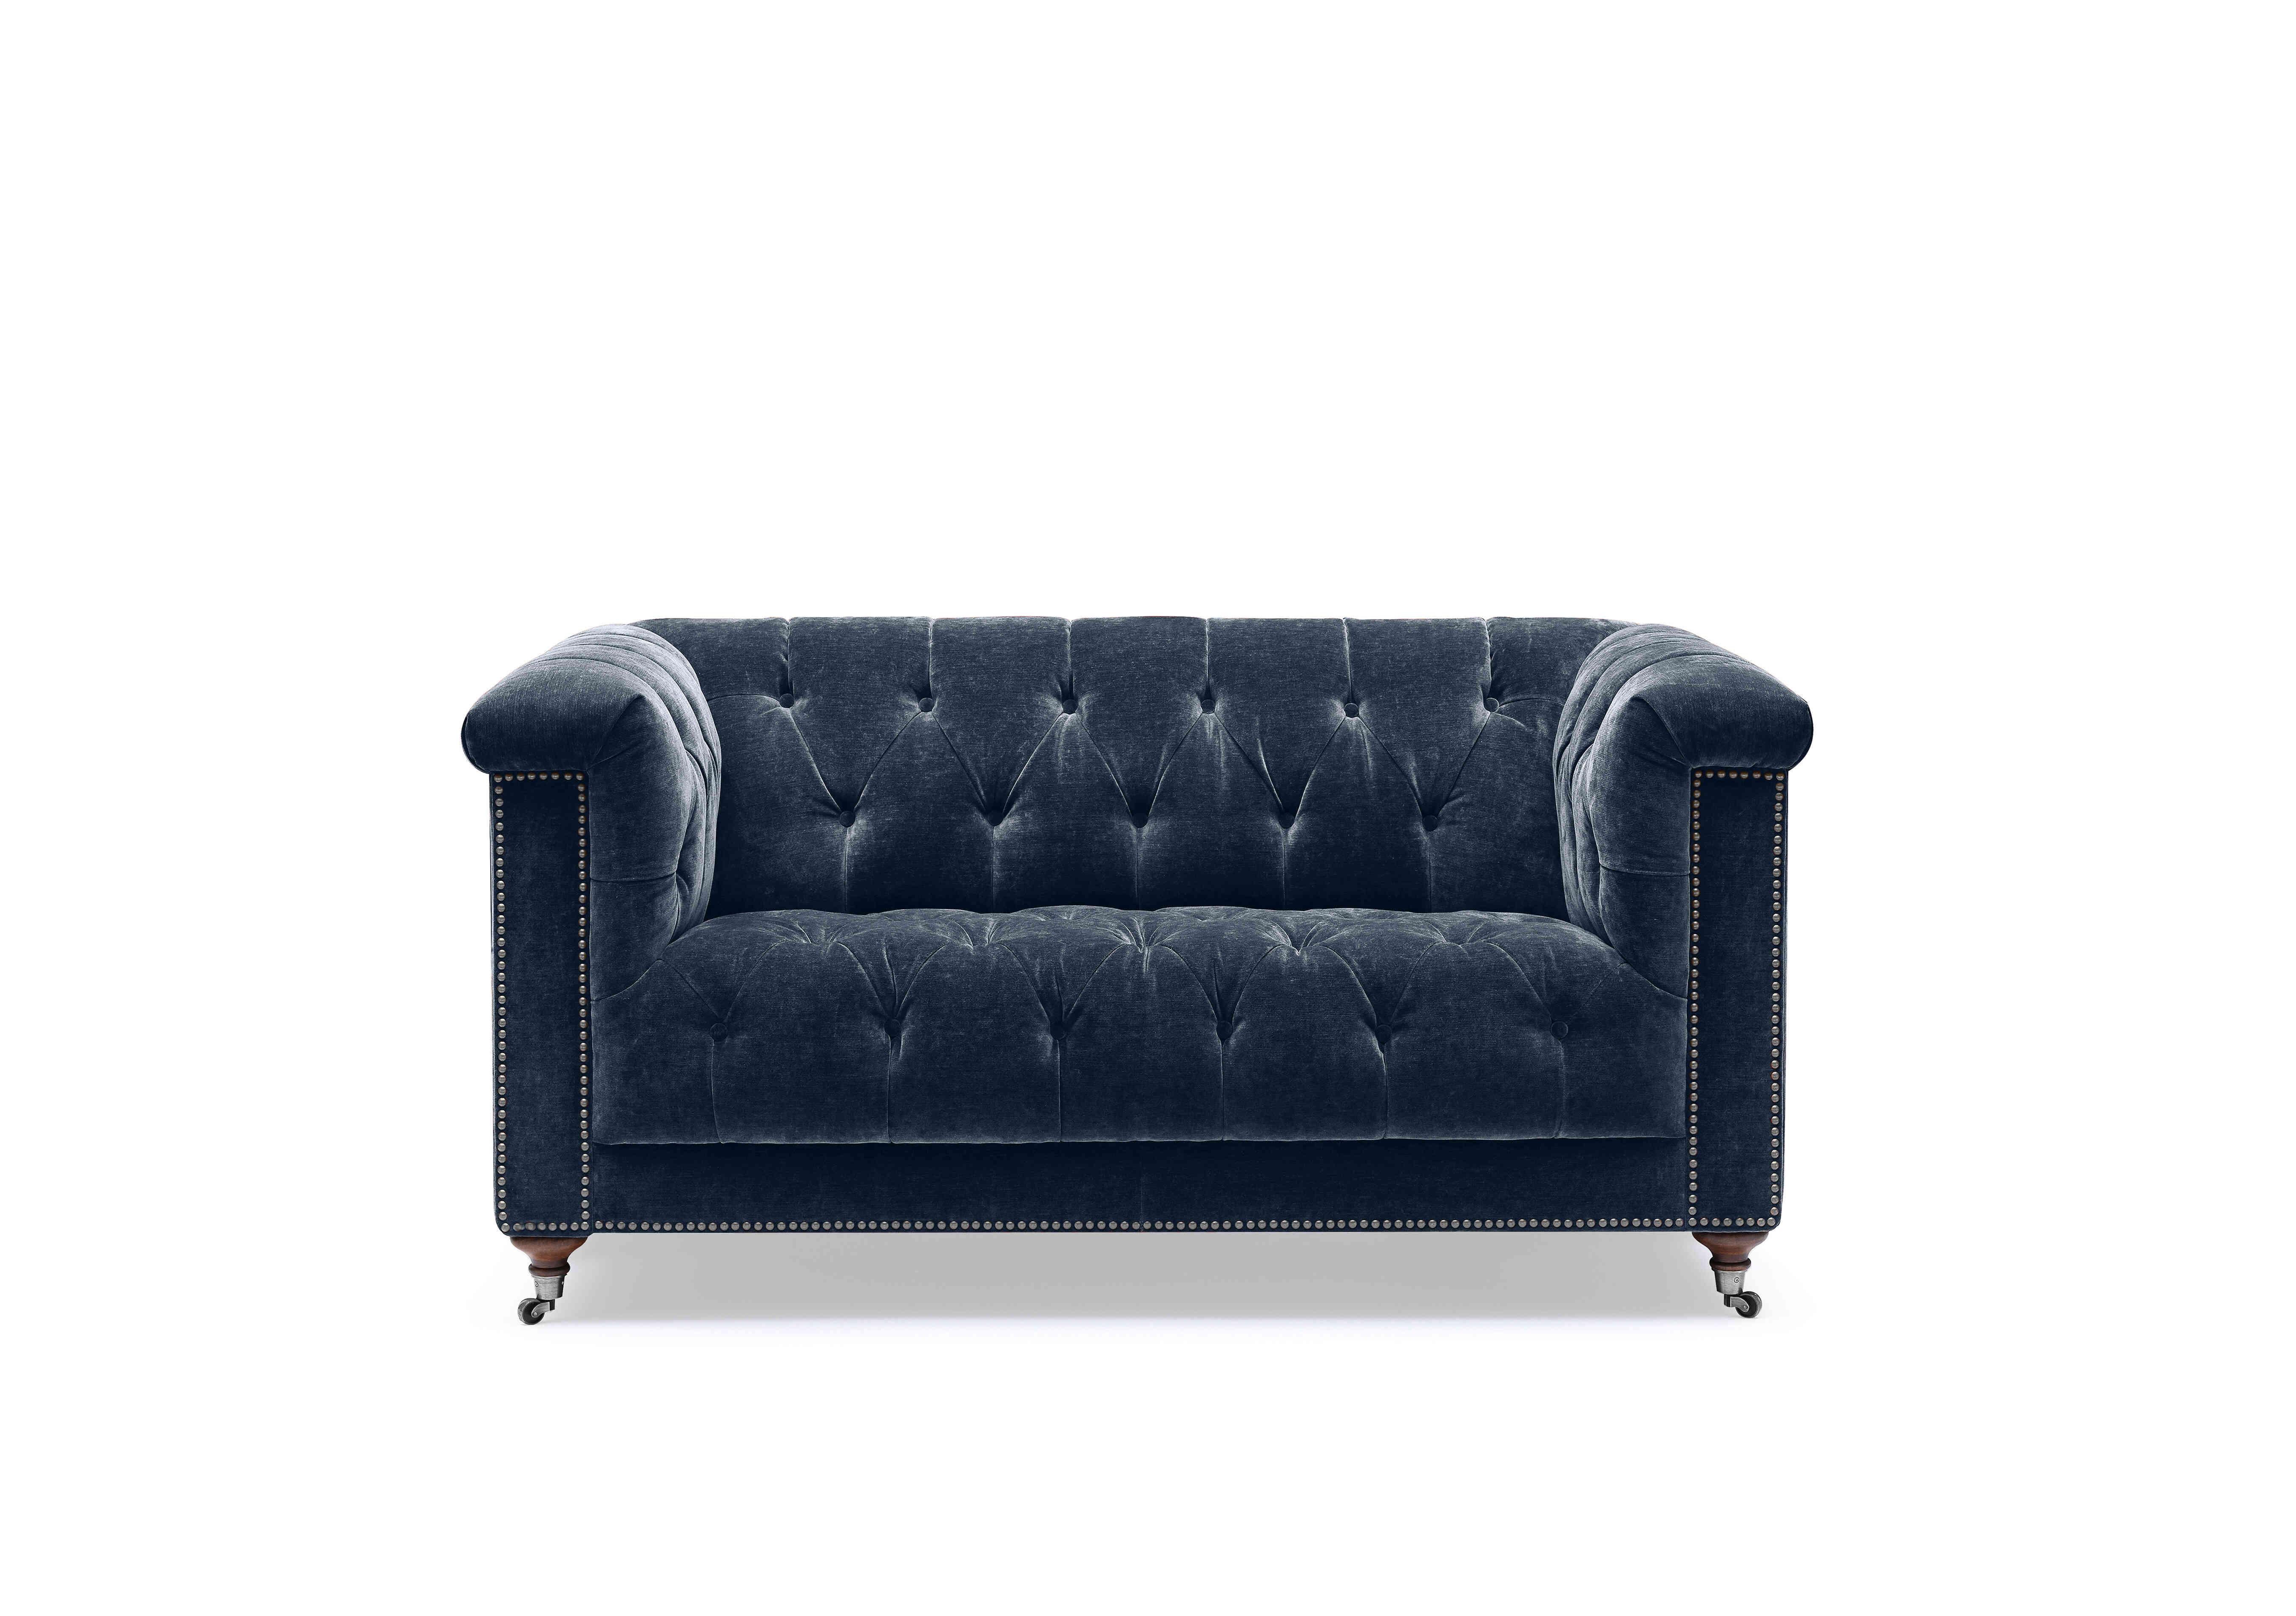 Wallace 2 Seater Fabric Chesterfield Sofa in X3y2-W024 Midnight on Furniture Village